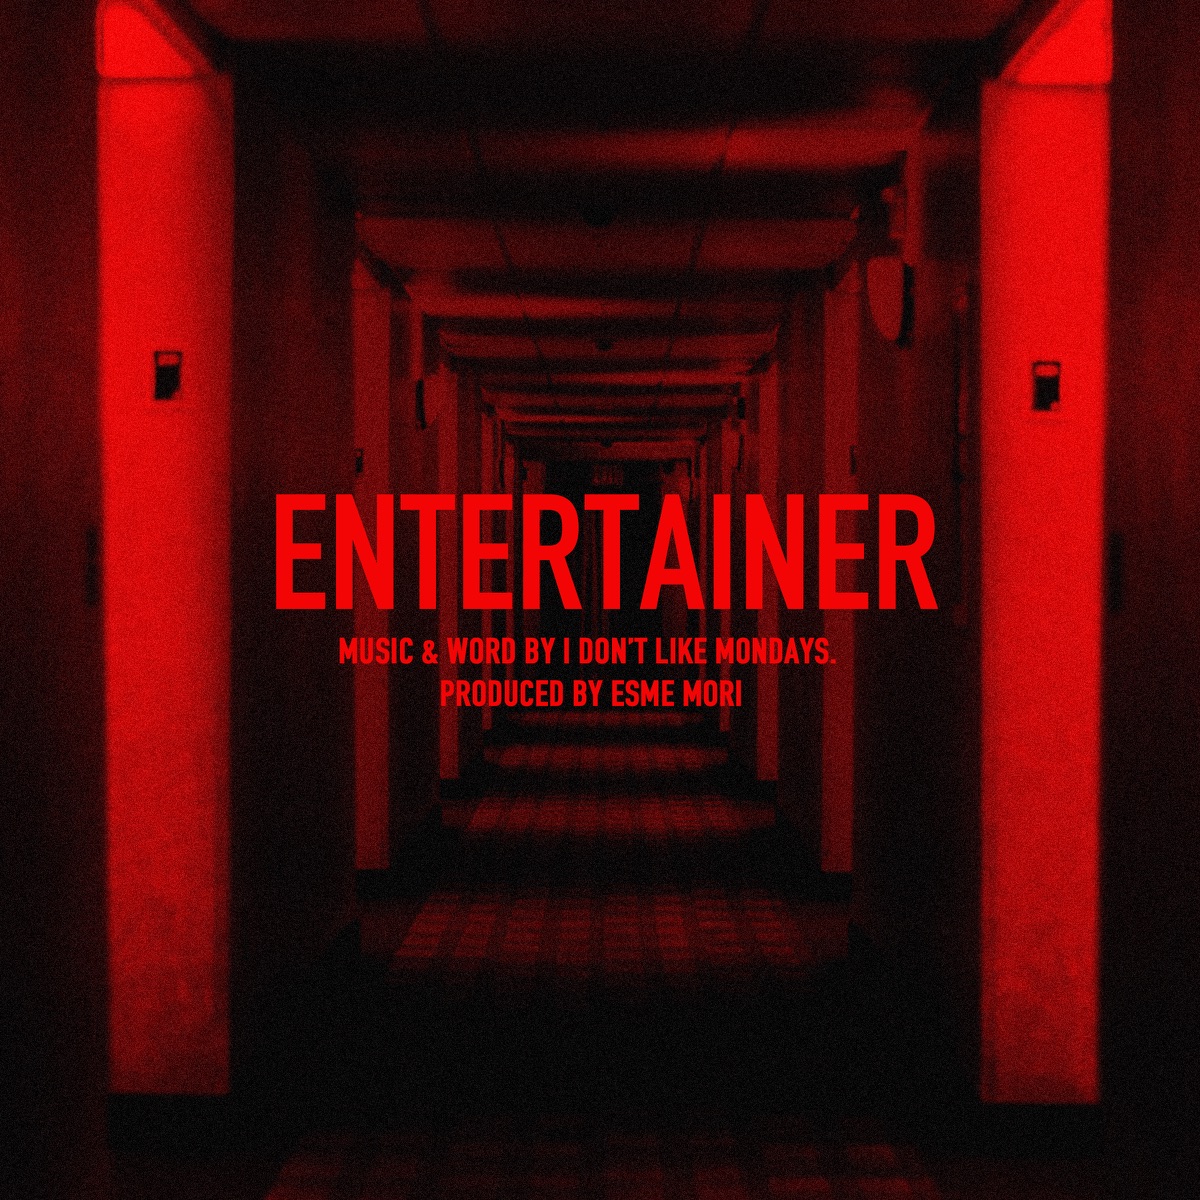 Cover art for『I Don't Like Mondays. - ENTERTAINER』from the release『ENTERTAINER